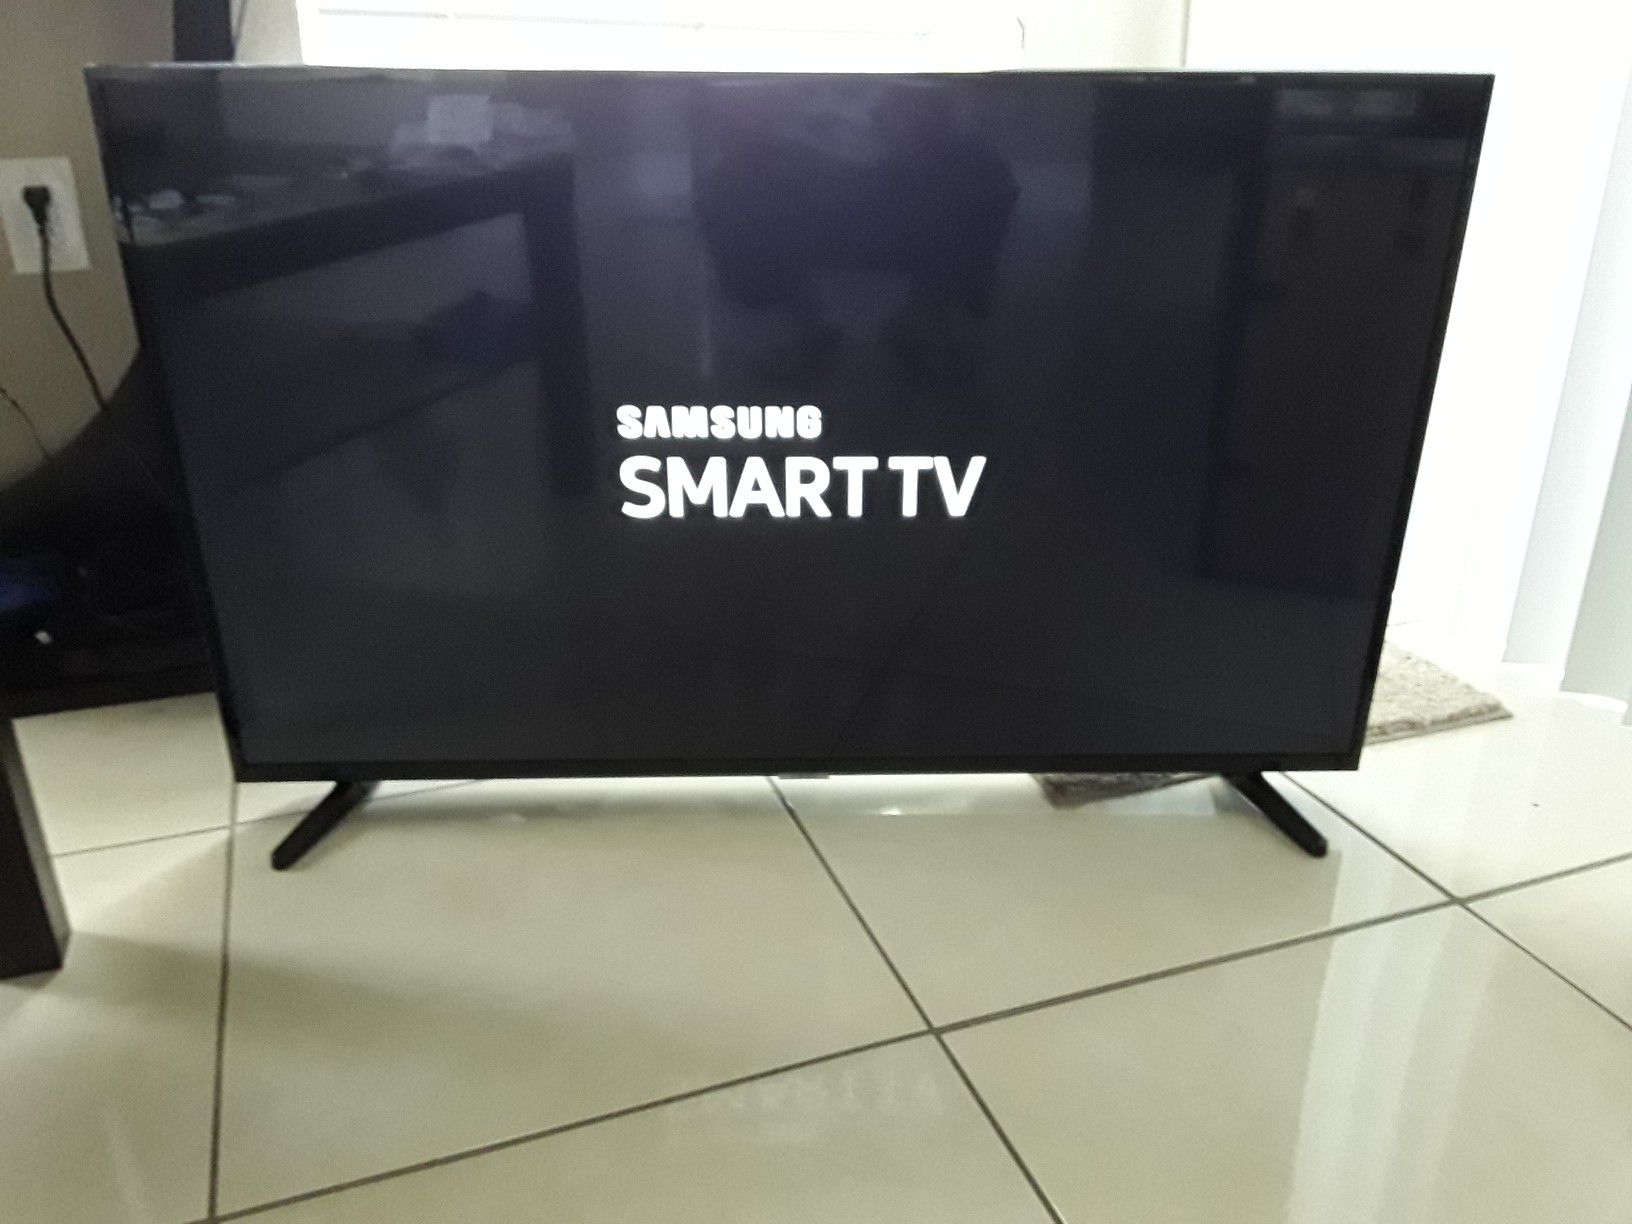 Samsung Smart TV 42 inches